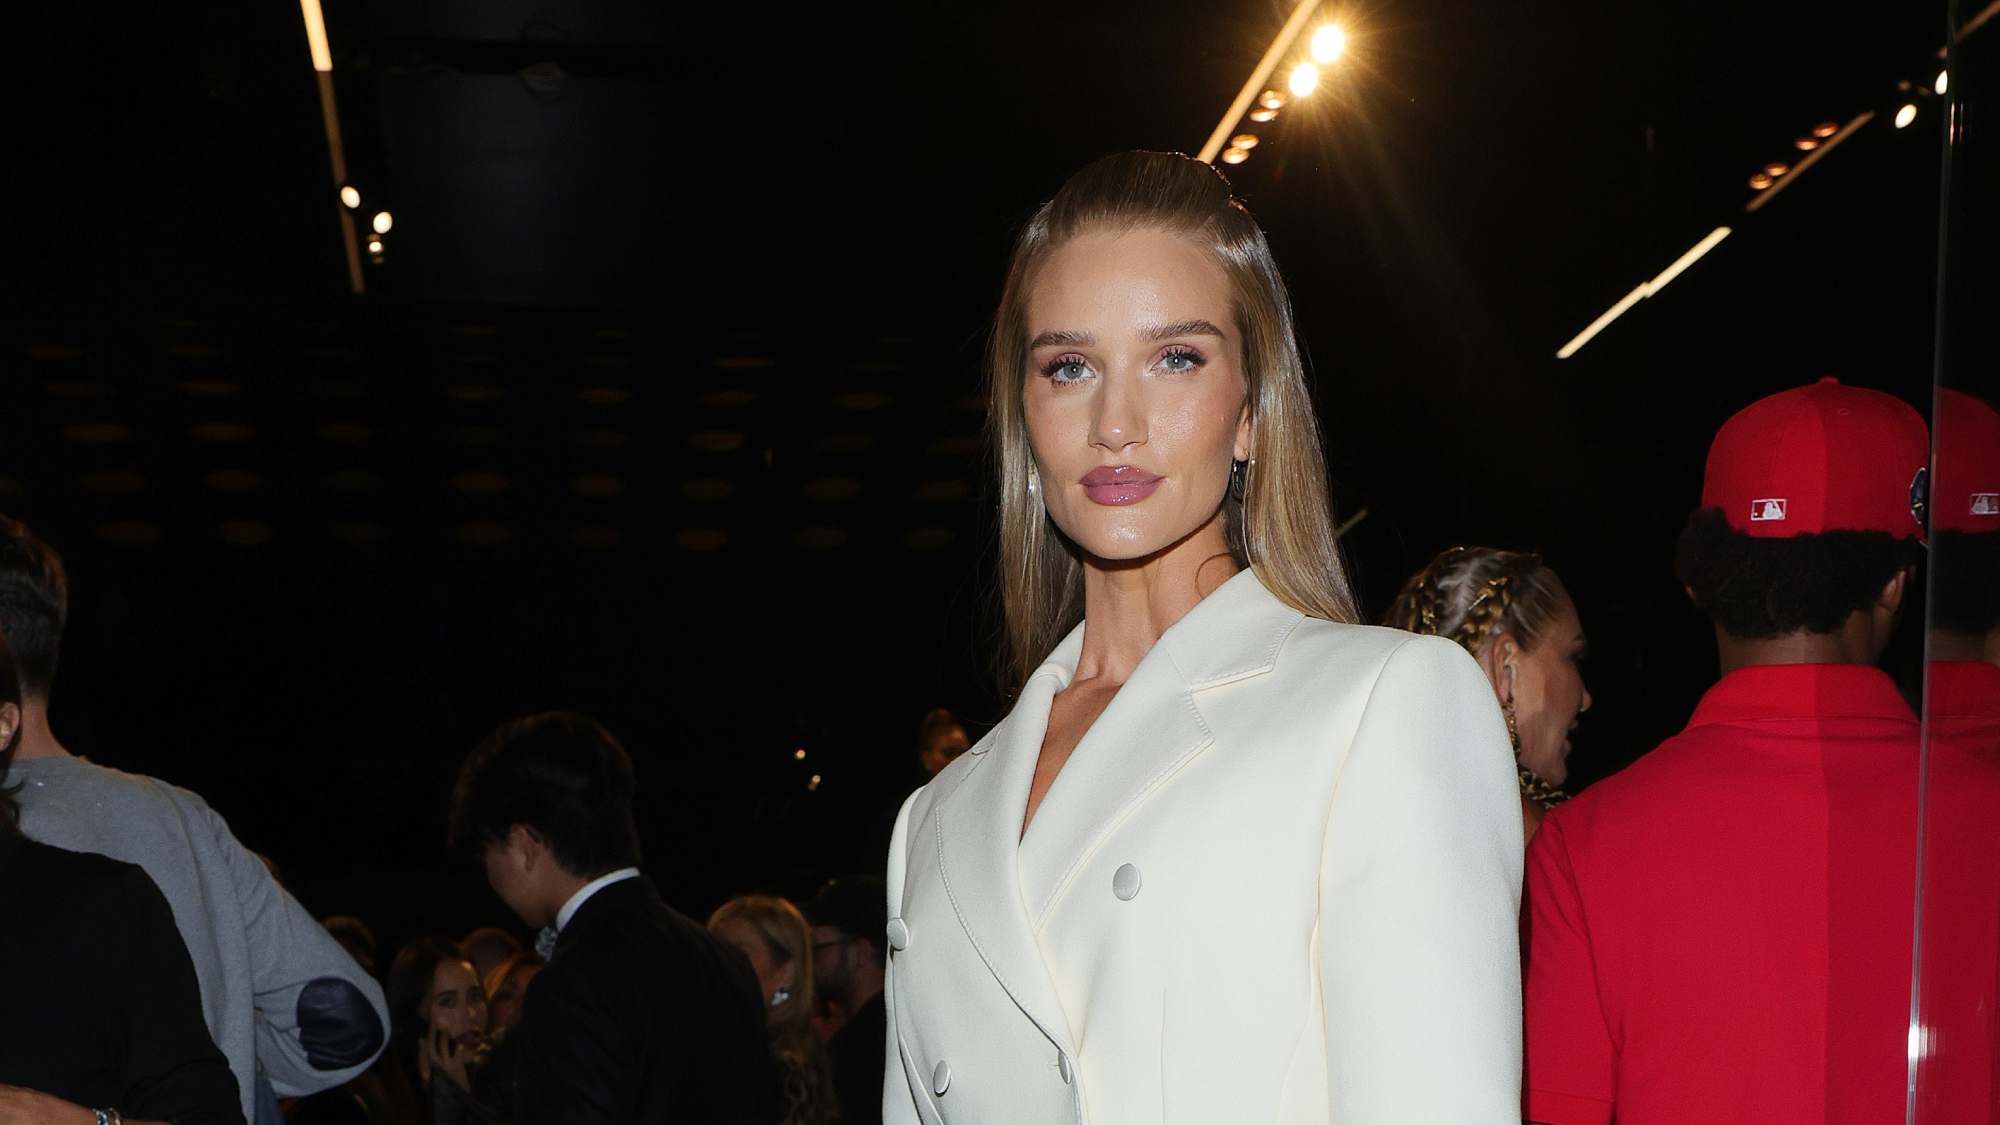 The 'pouf' hairstyle—and Rosie Huntington-Whitely is a fan